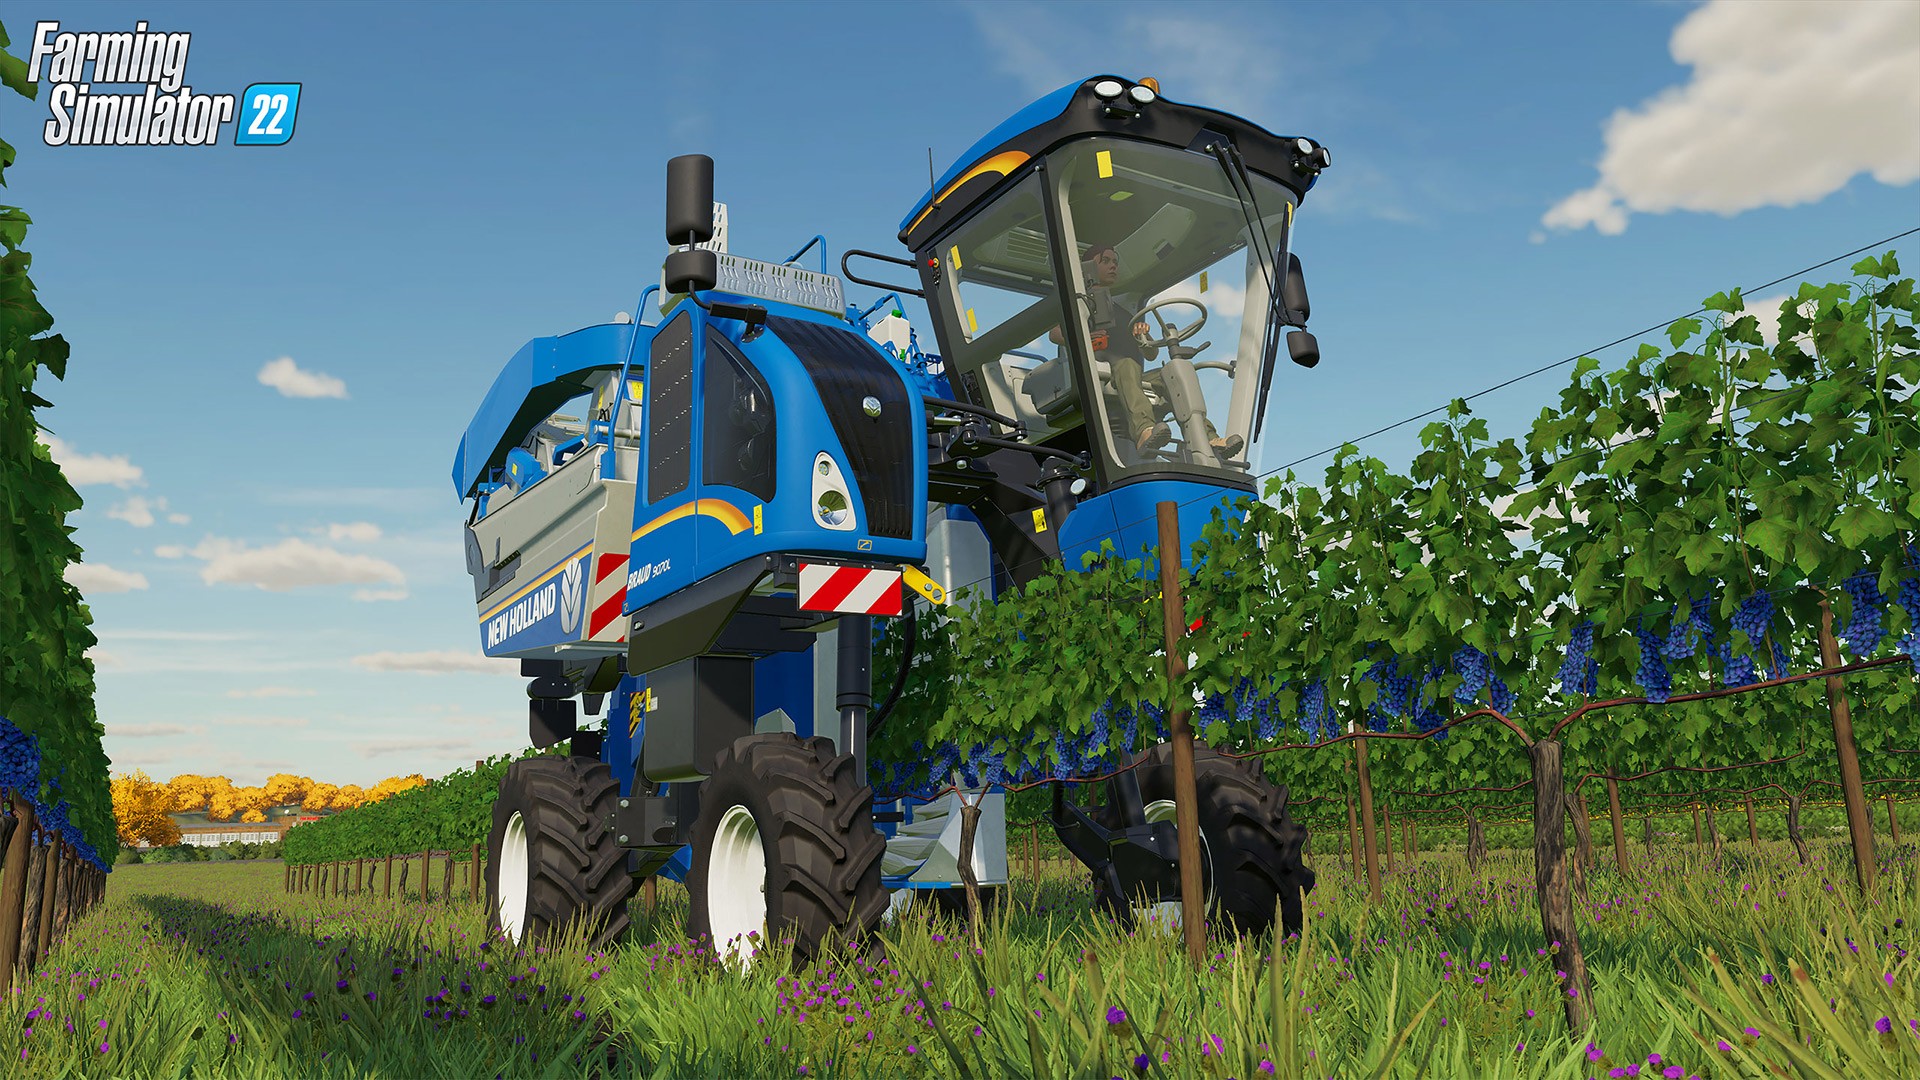 Farming Simulator 22 and dedicated servers: don't fall for the trap